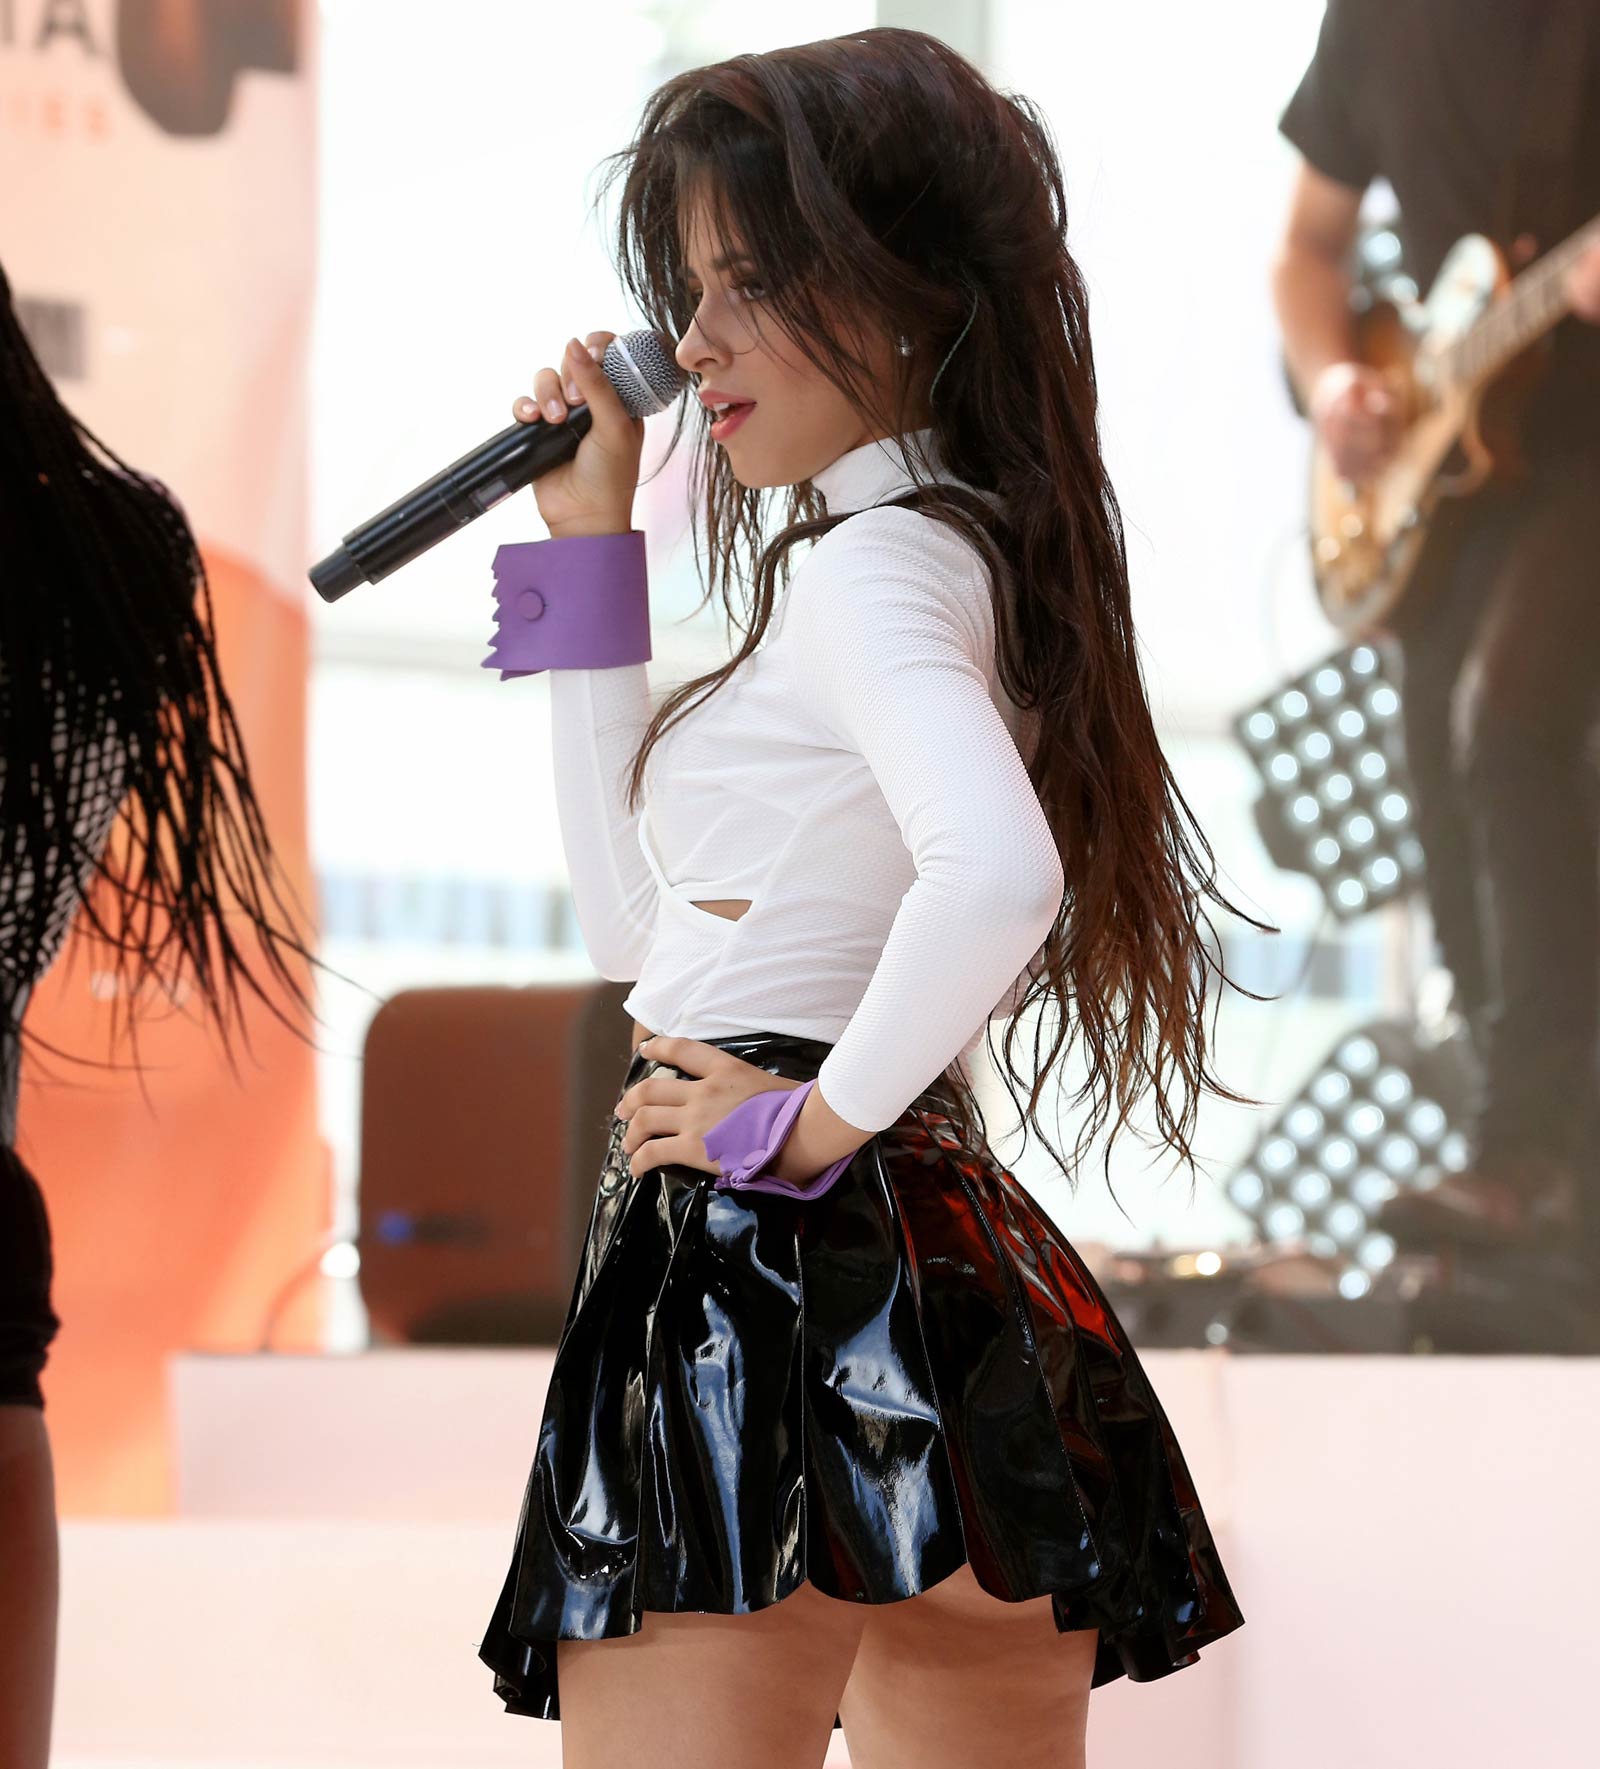 Fifth Harmony performed on NBC’s Today